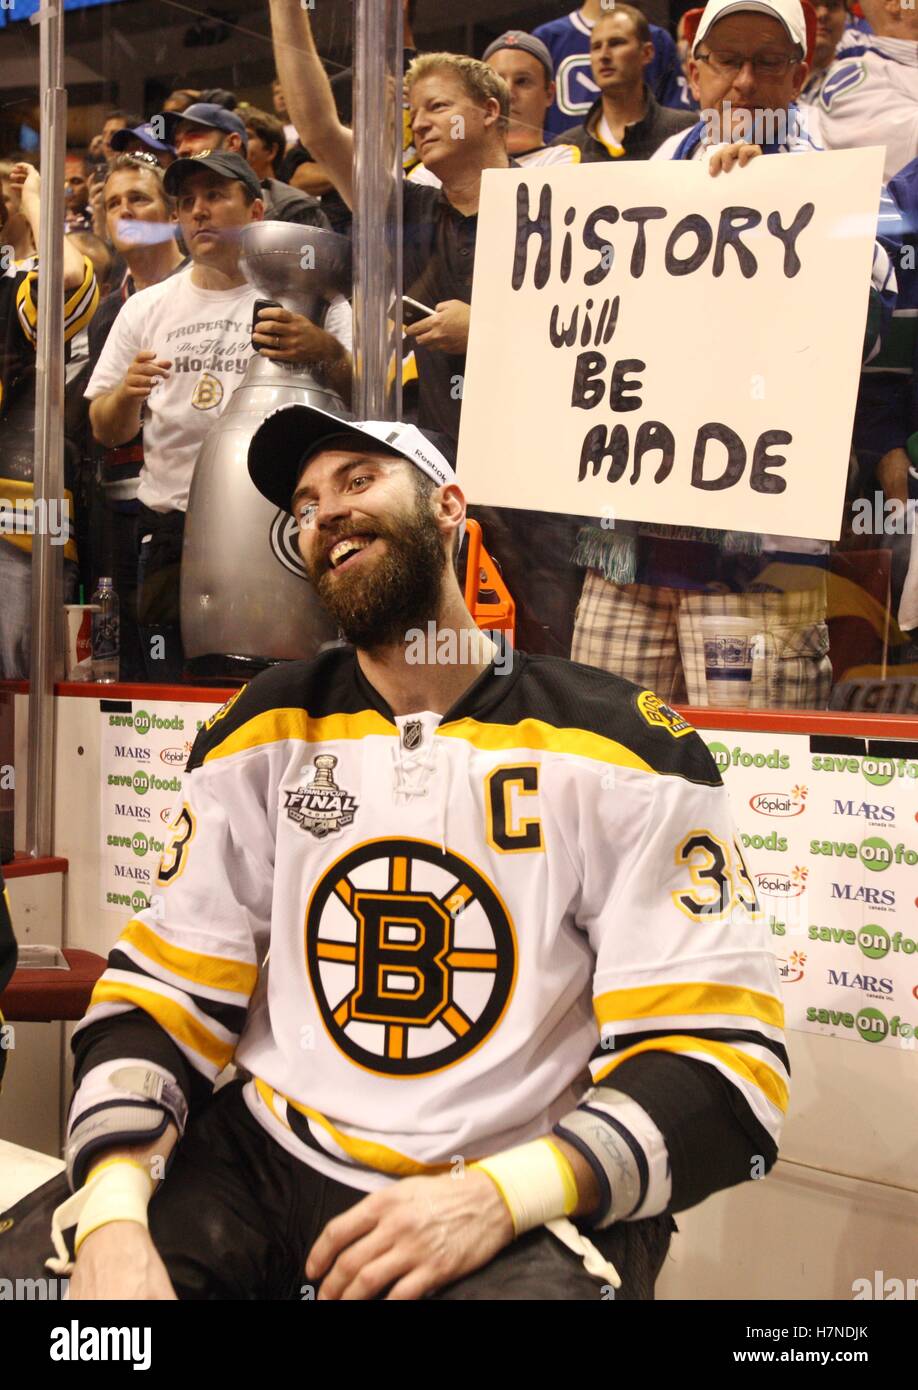 Re-live the Bruins' 2011 Stanley Cup celebration (Video)